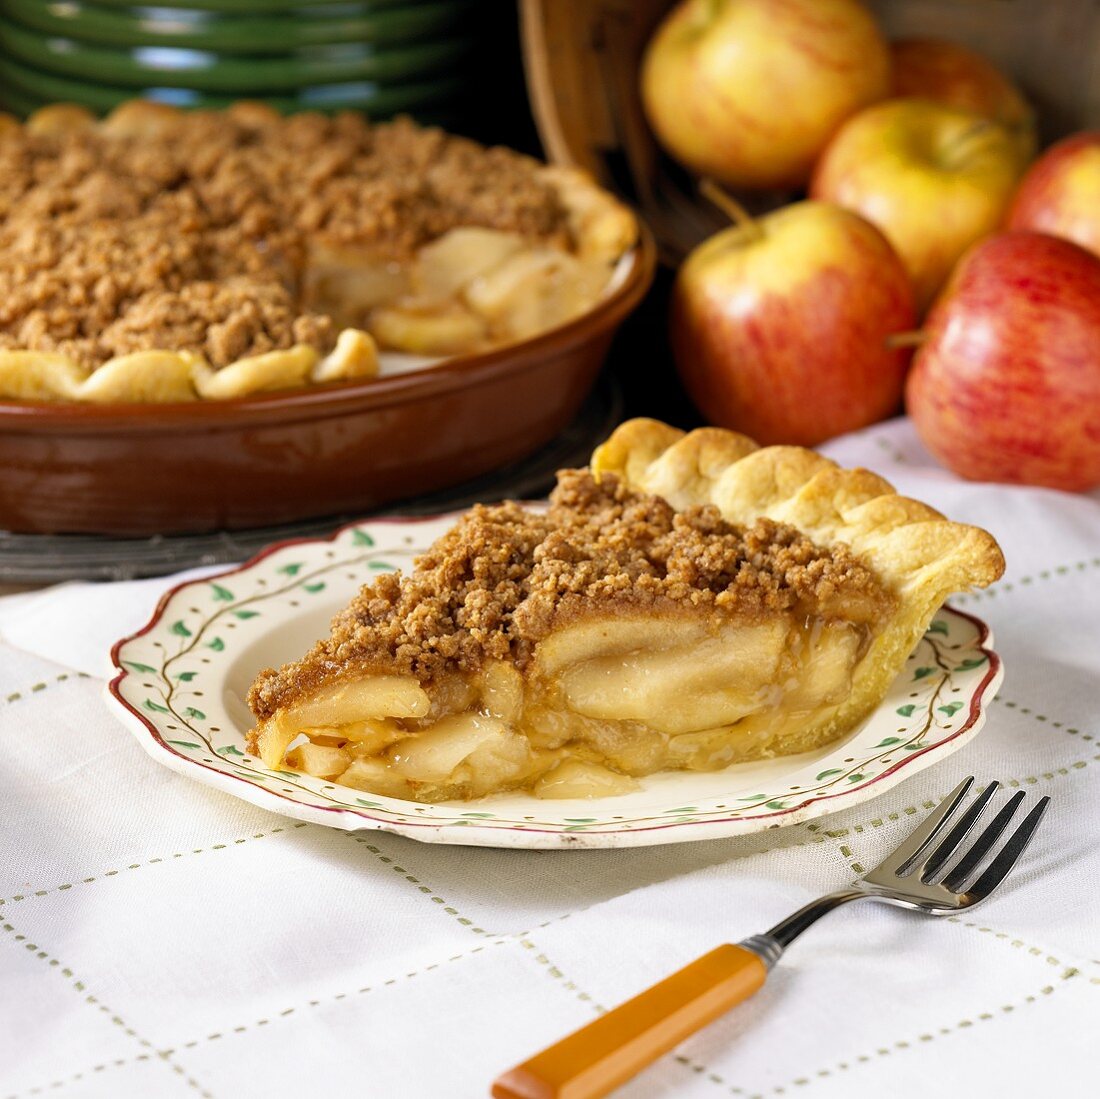 A Slice of Apple Pie with Peanut Crumb Topping